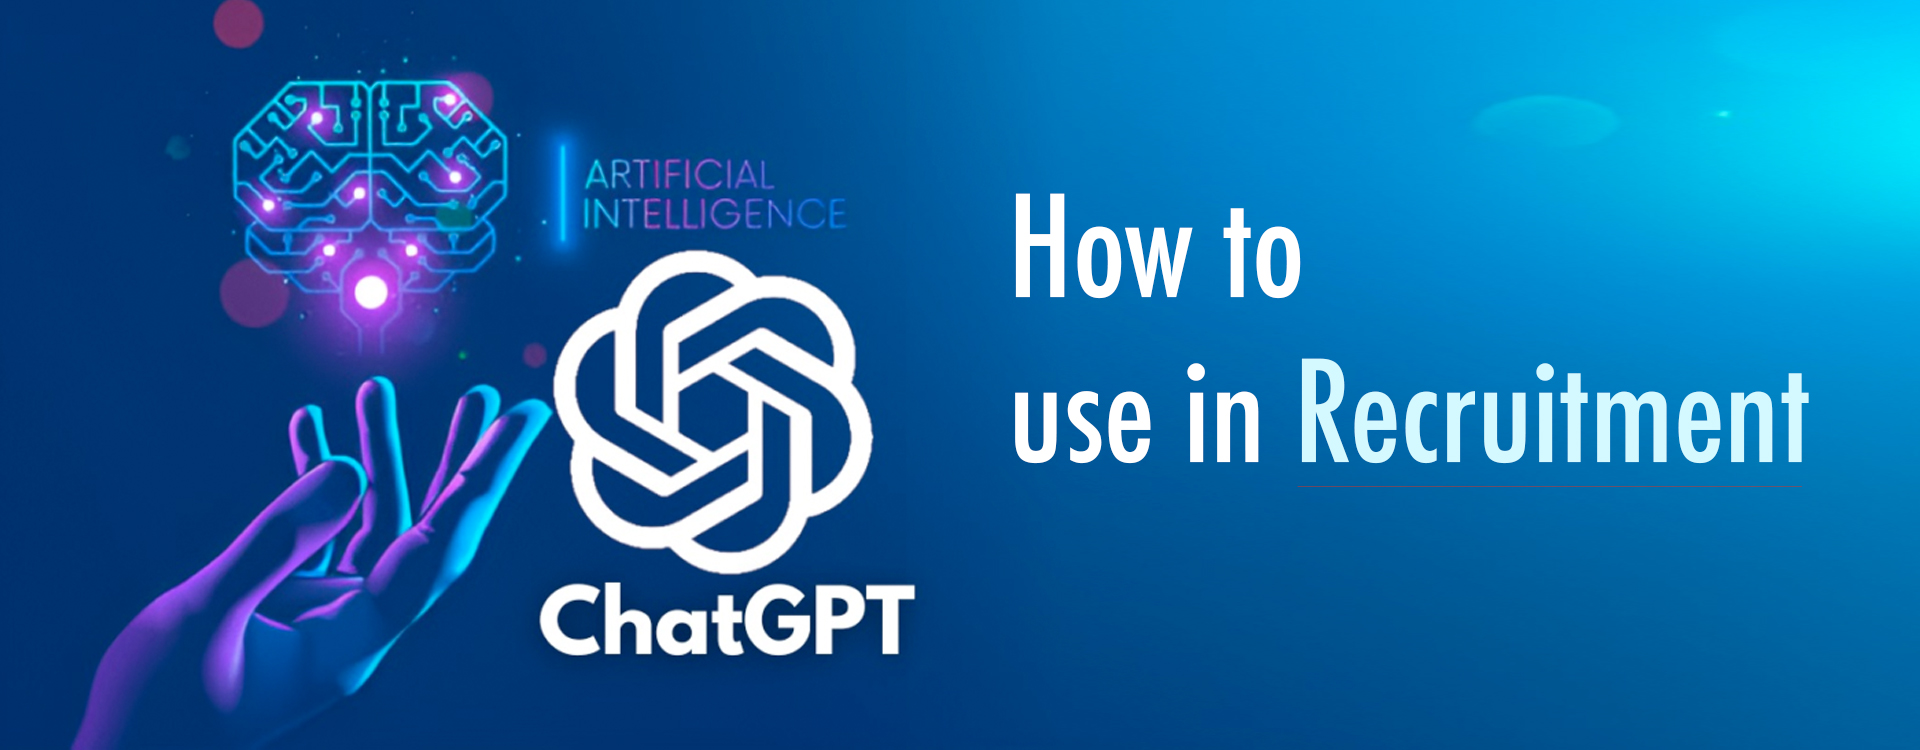 How to use ChatGPT in Recruitment